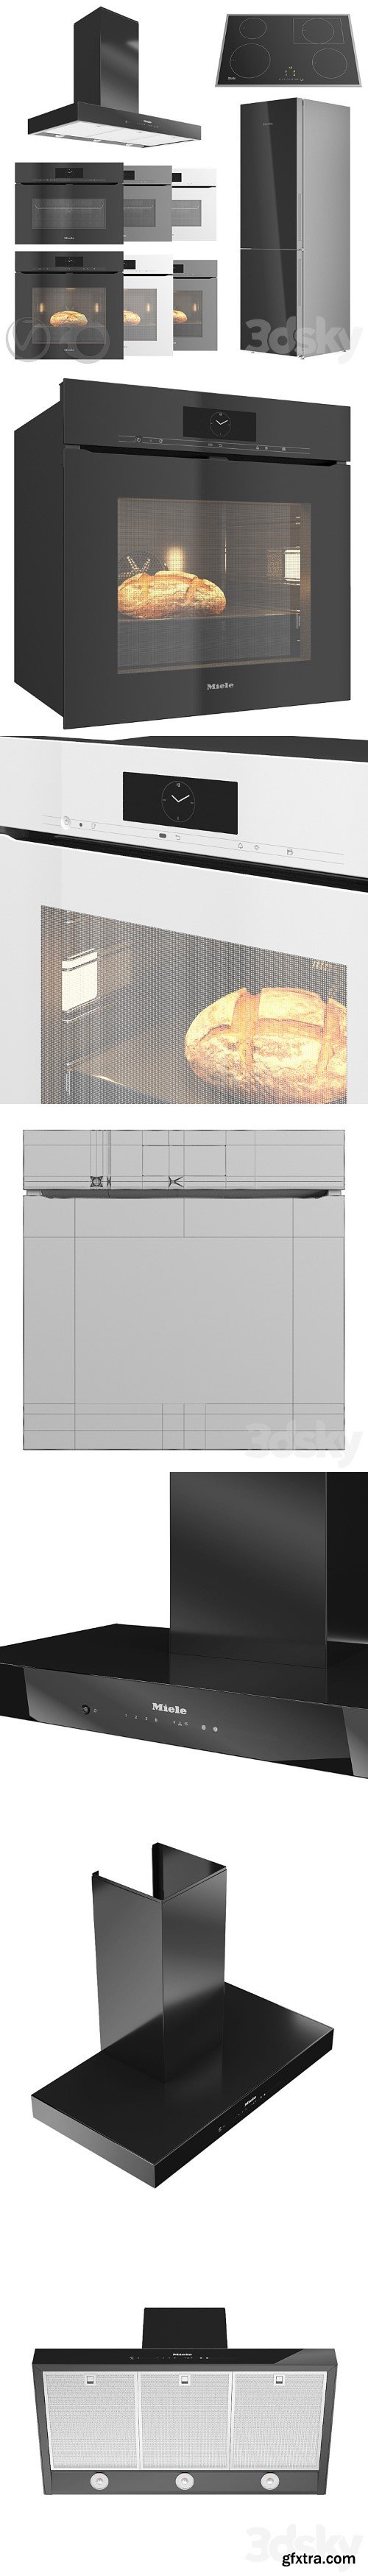 MIELE Household appliances collection 06